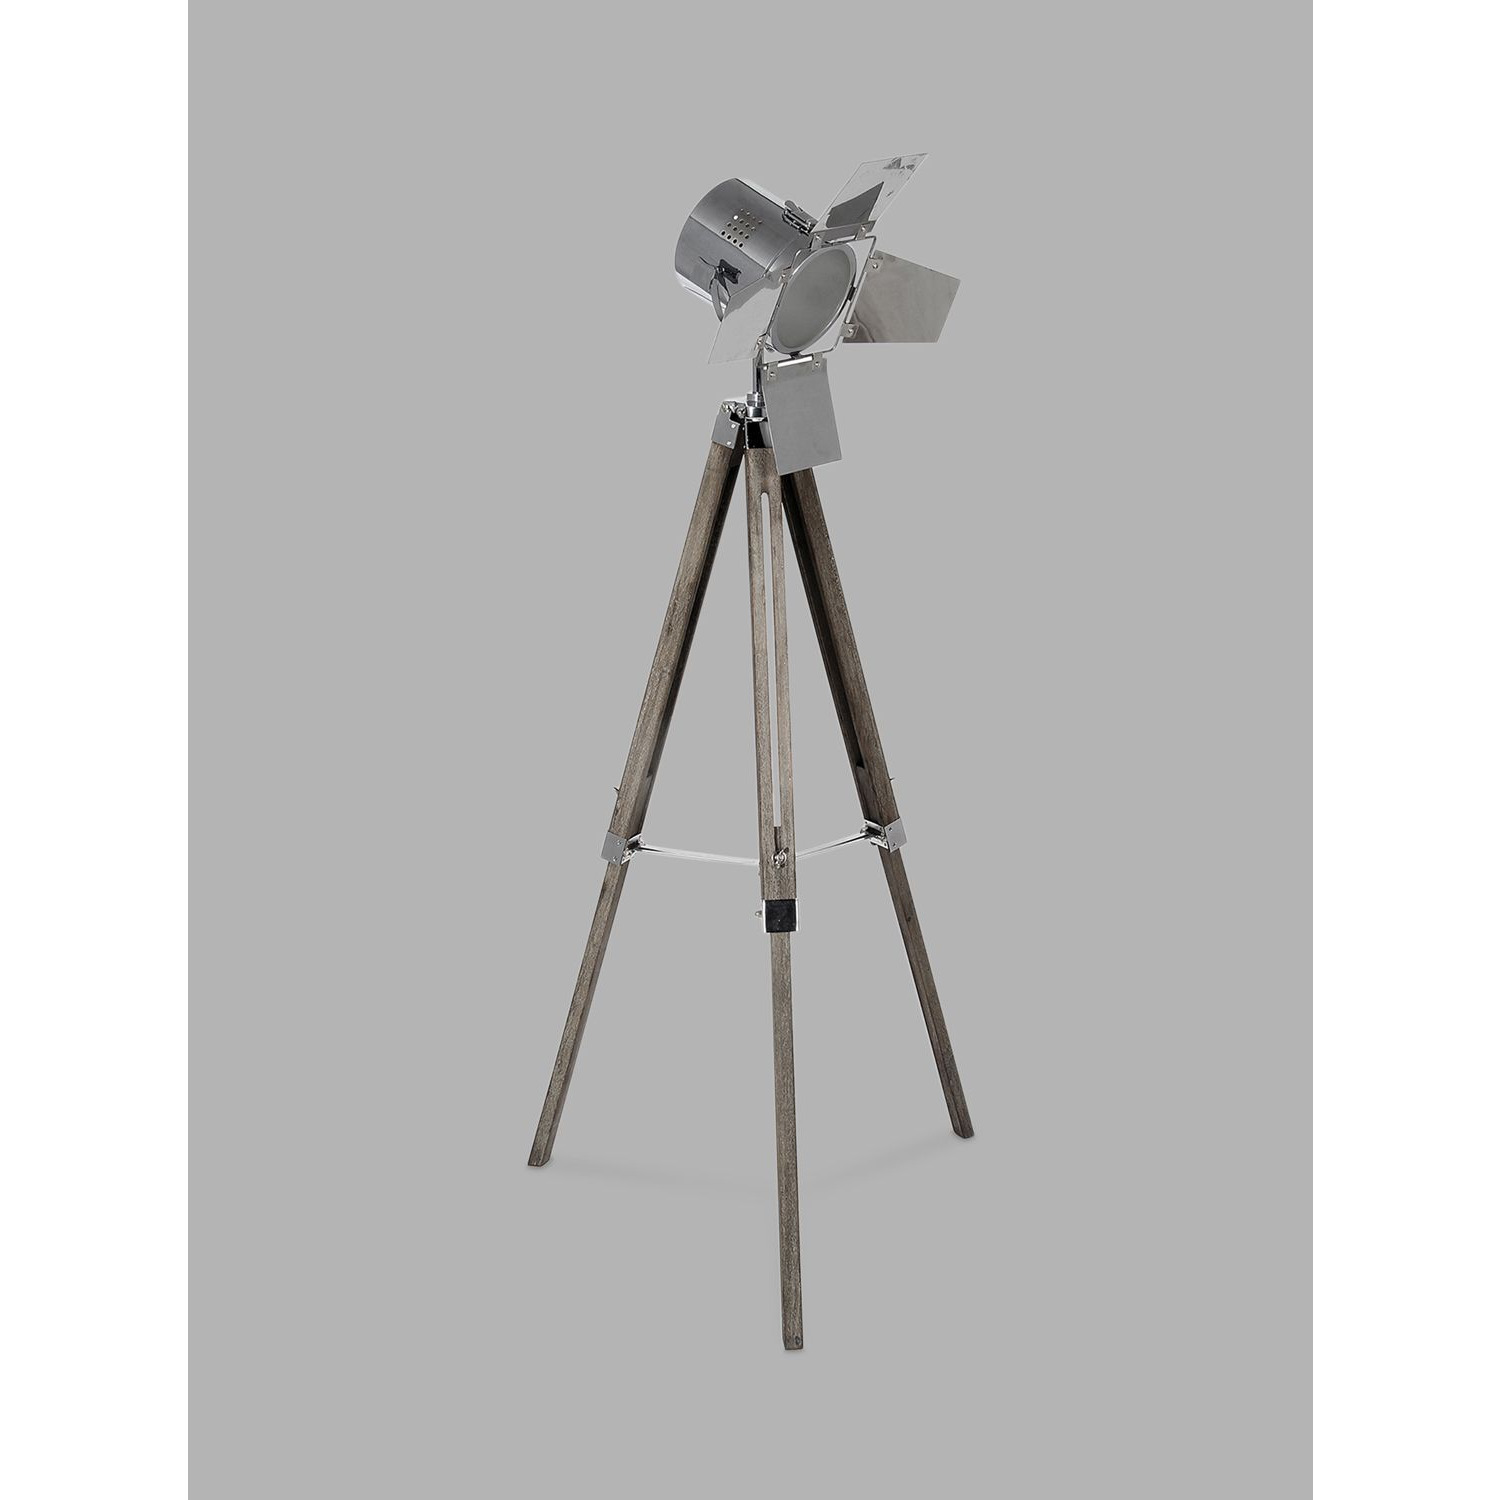 Pacific Hereford Tripod Floor Lamp